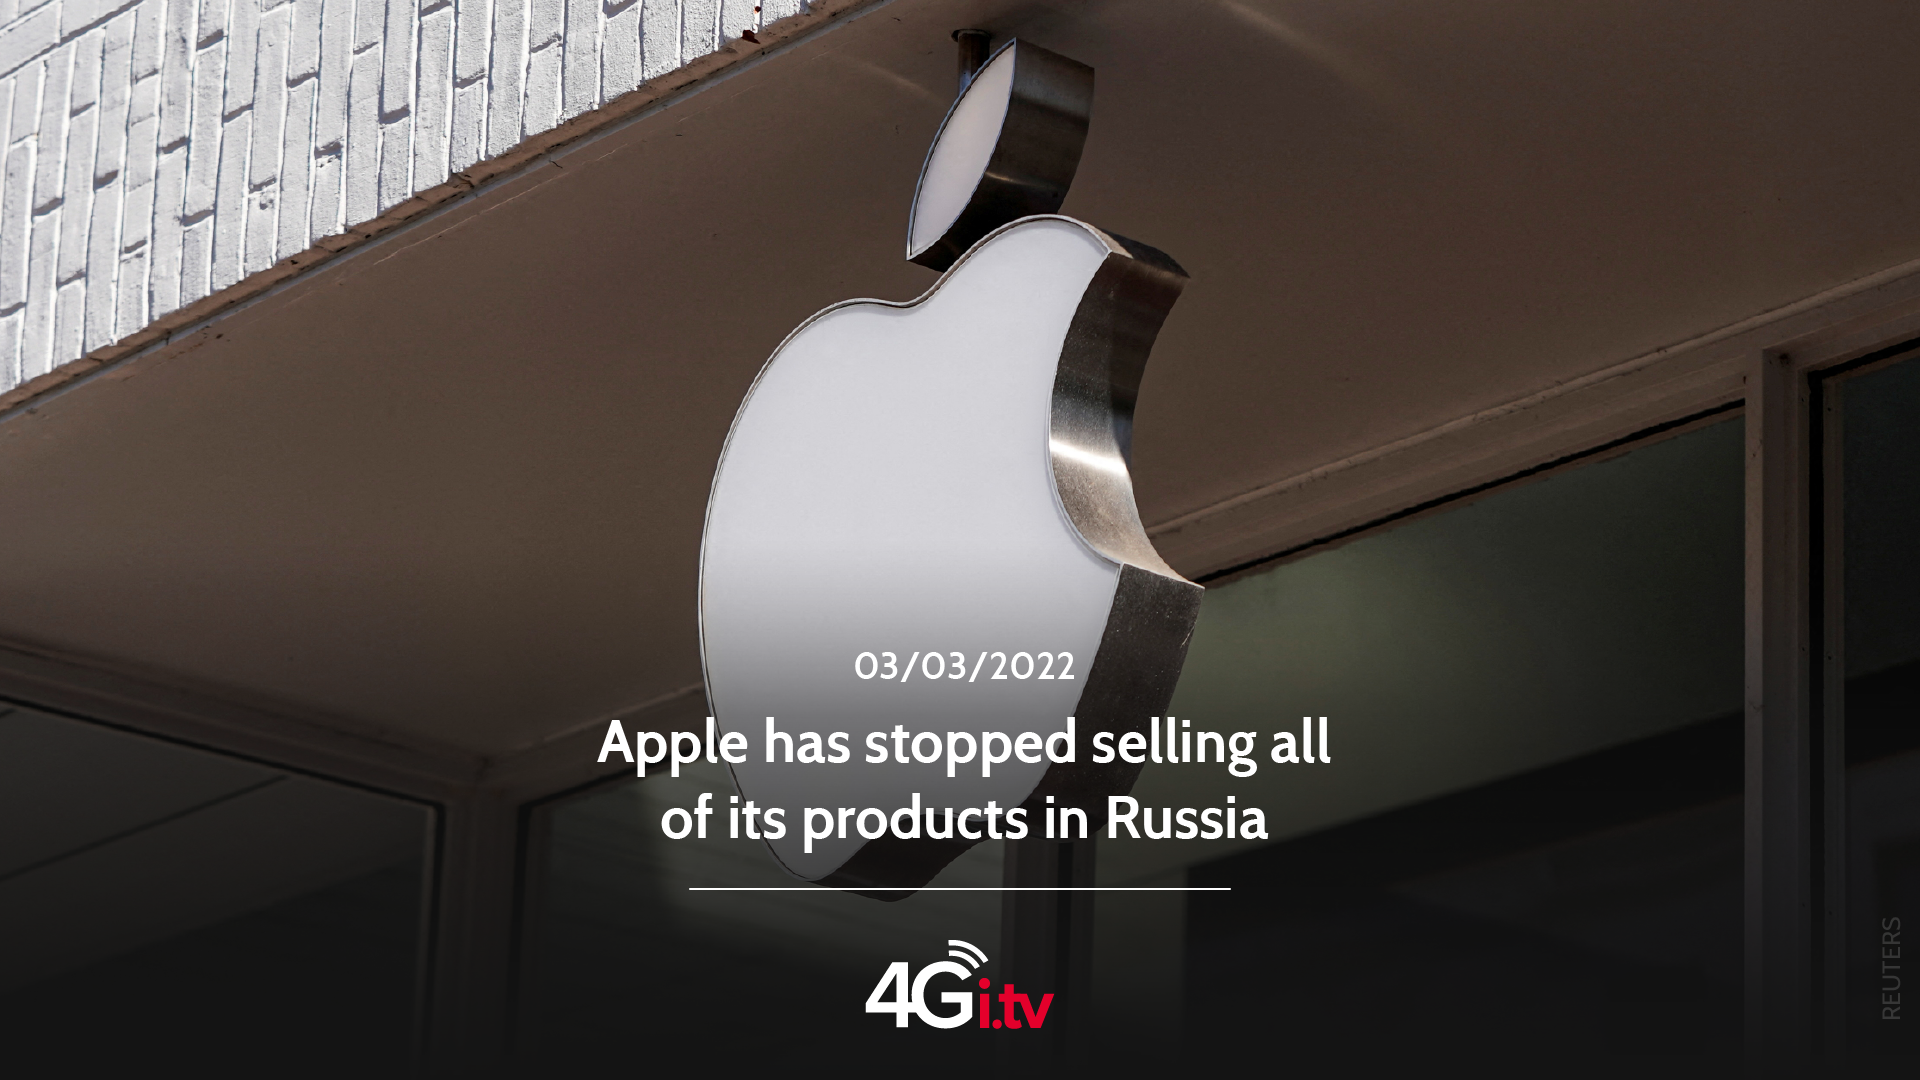 Lesen Sie mehr über den Artikel Apple has stopped selling all of its products in Russia